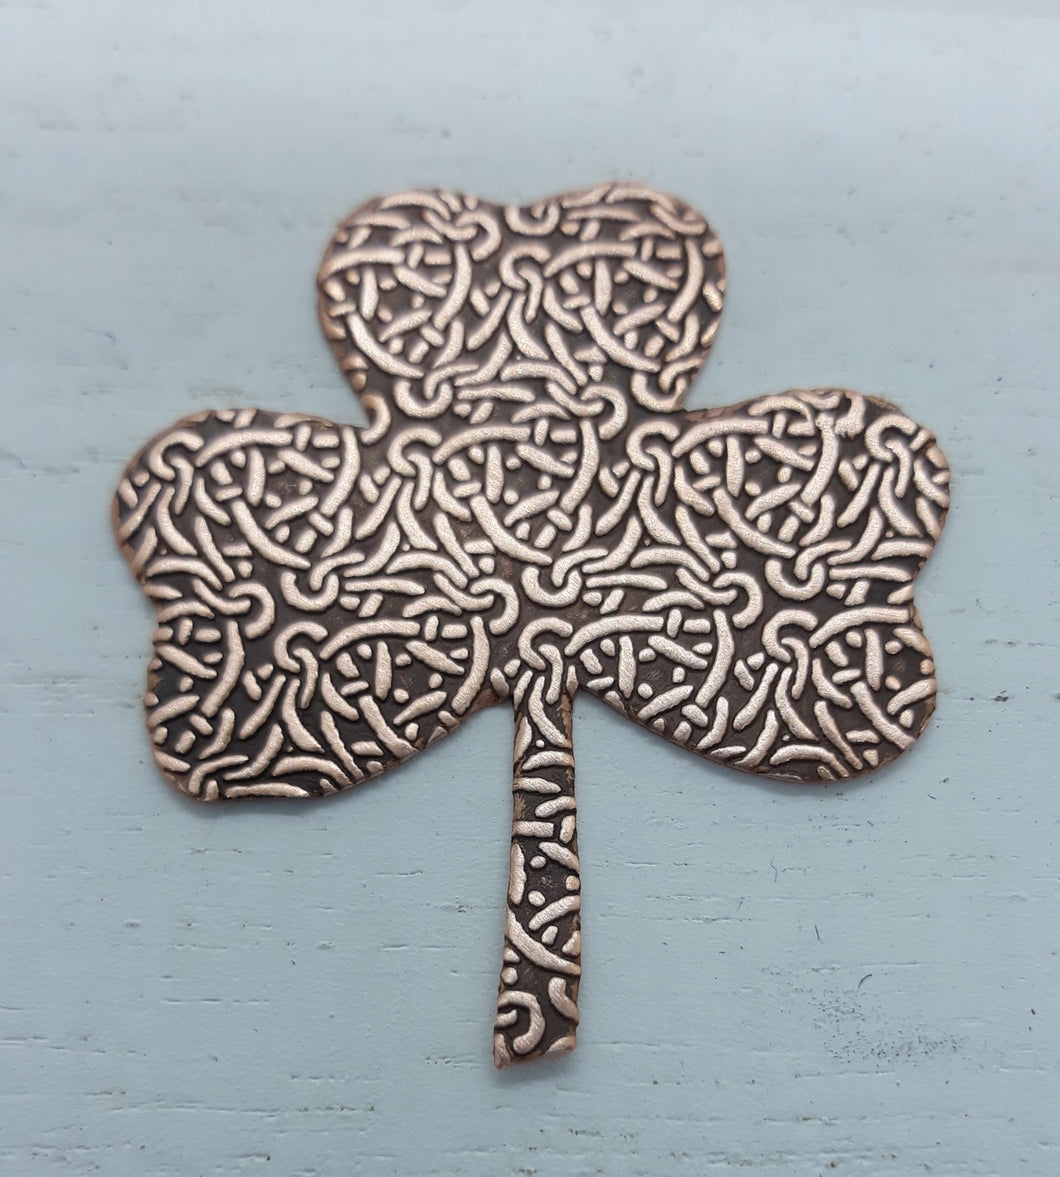 Shamrock Stamping Blank- textured with Celtic Knot Design, Copper Stamping Blank, Enamel Supply, Jewelry Component, Irish Jewelry, CelticArt Active